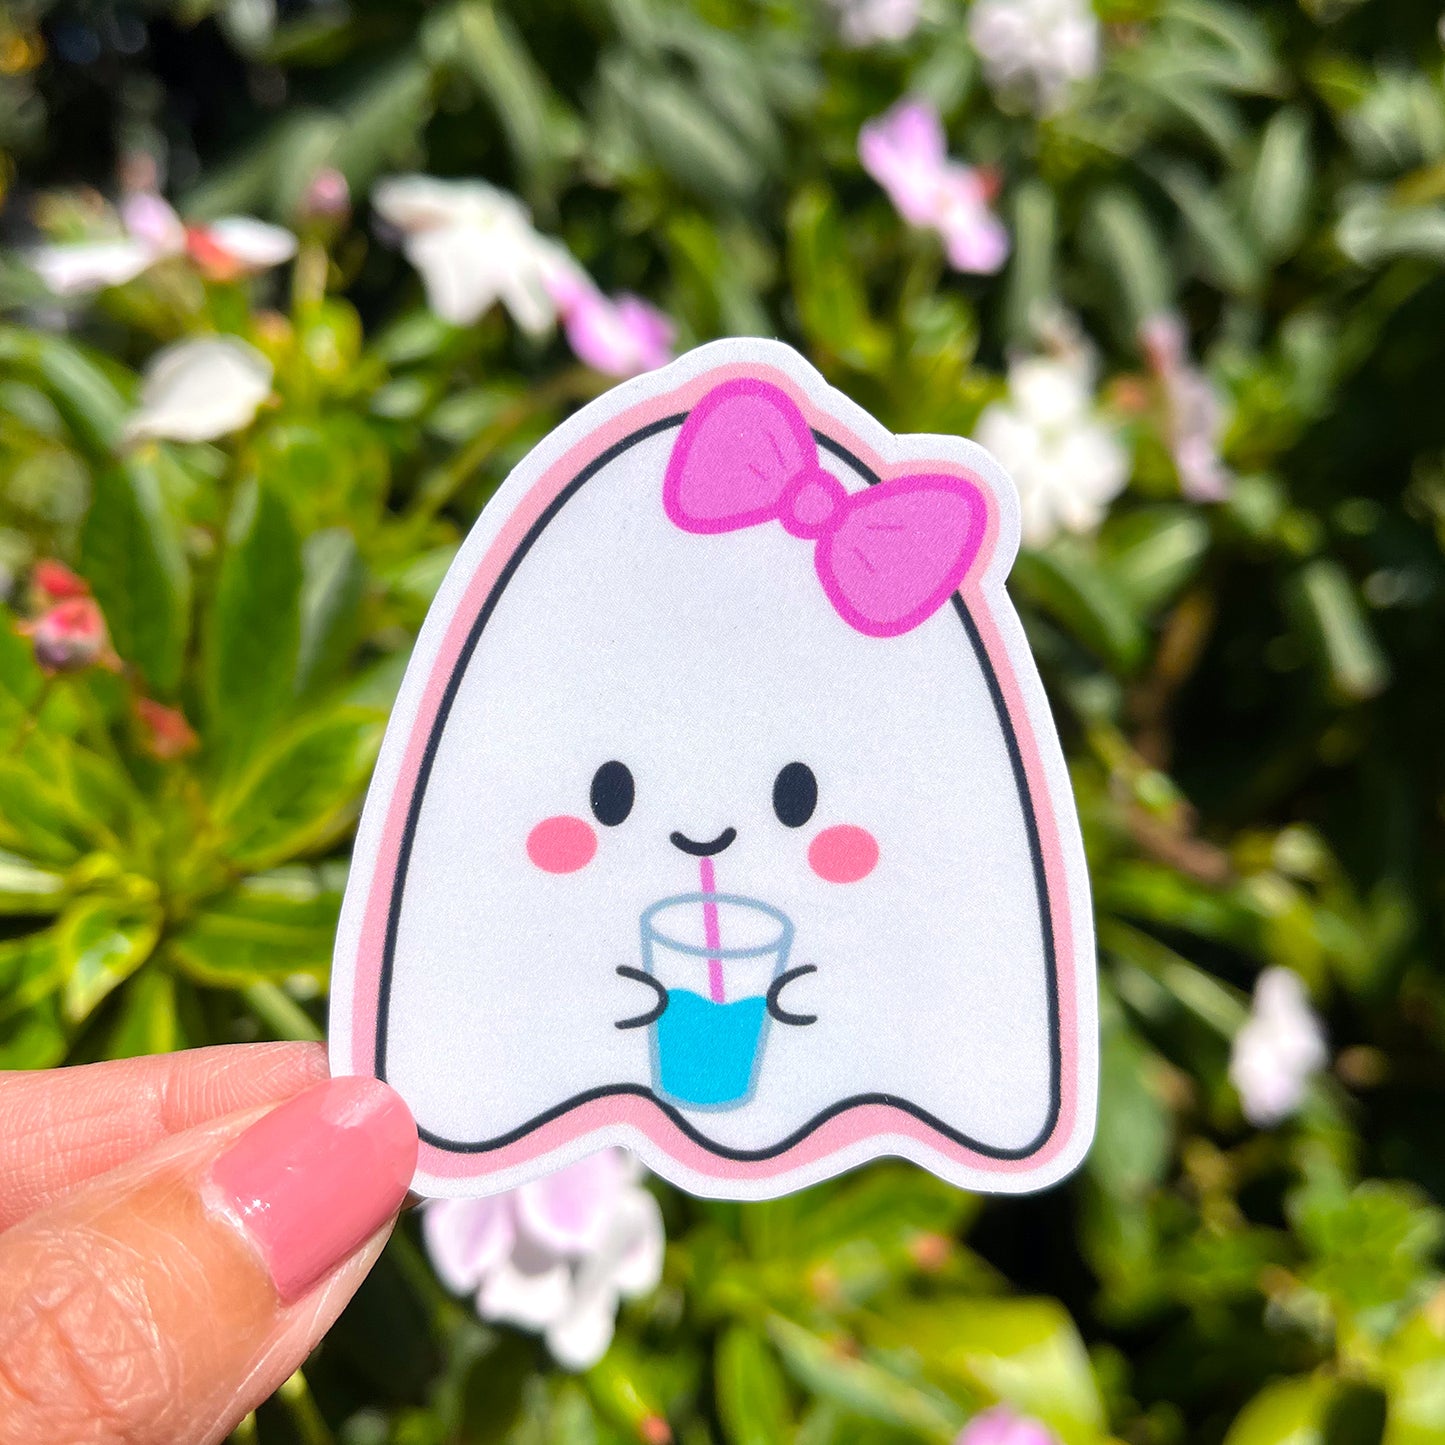 Hydrating ghost outside with flowers